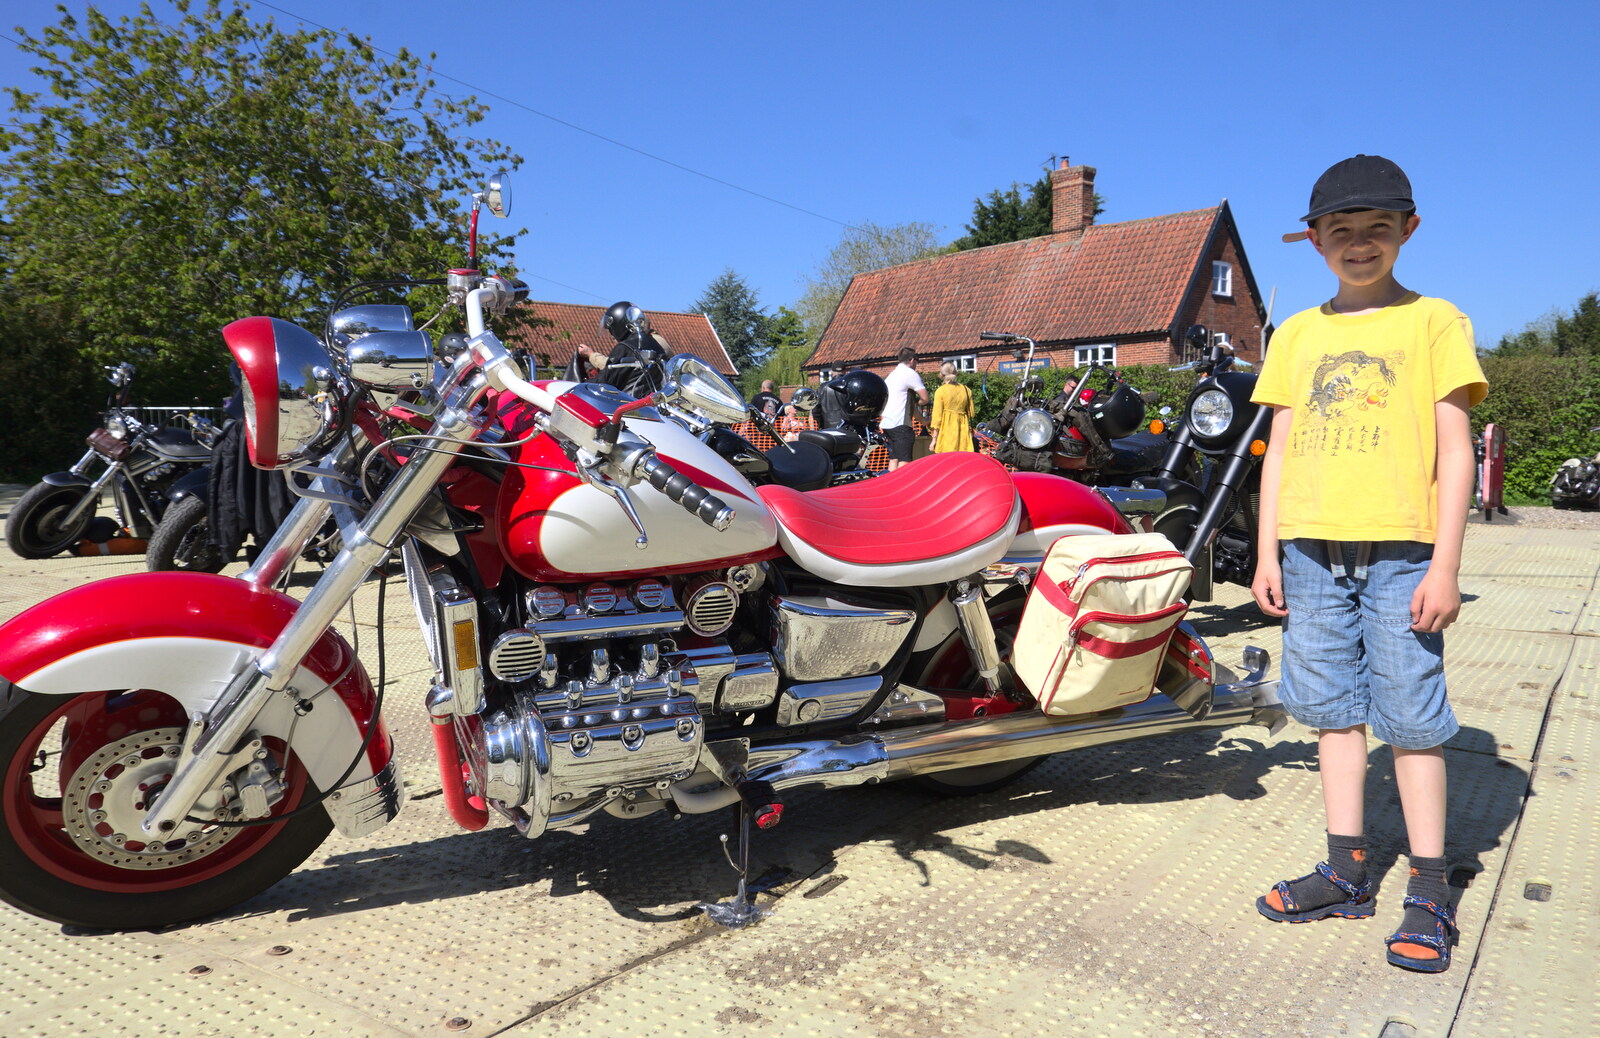 Fred stands next to a truly massive v-6 motorbike from Beer, Bikes and Bands, Burston Crown, Burston, Norfolk - 6th May 2018